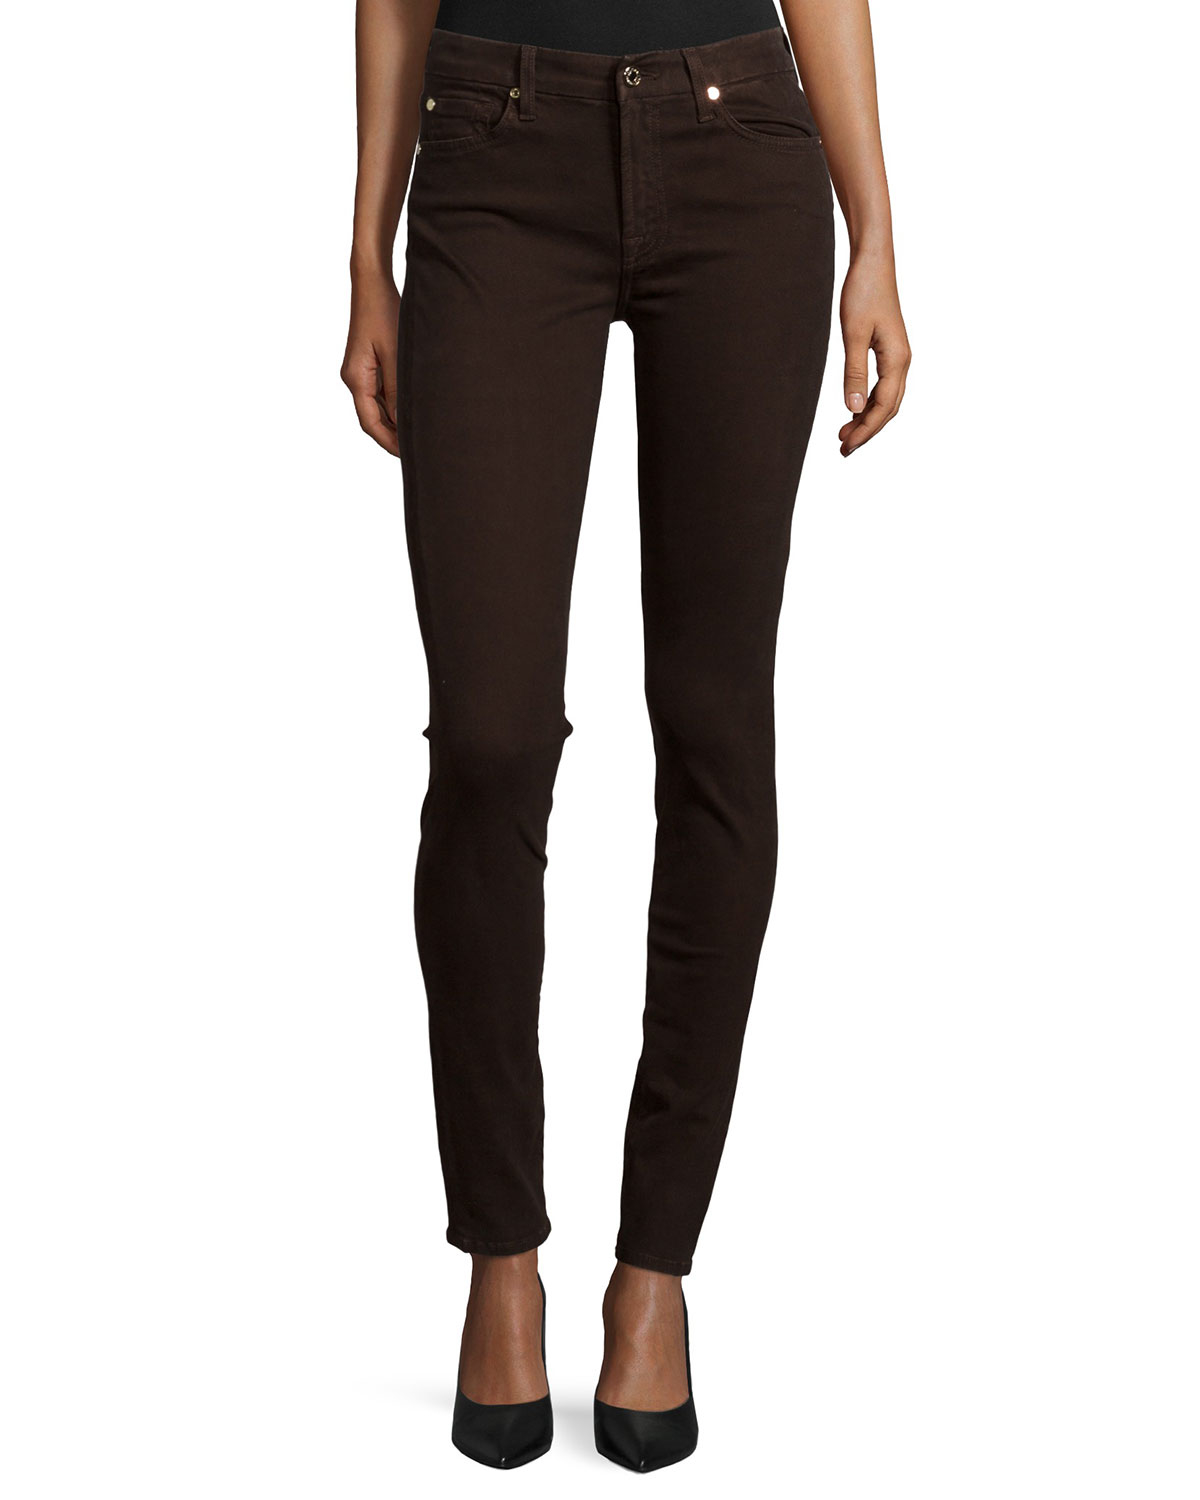 7 For All Mankind Mid-rise Skinny Jeans in Brown - Lyst